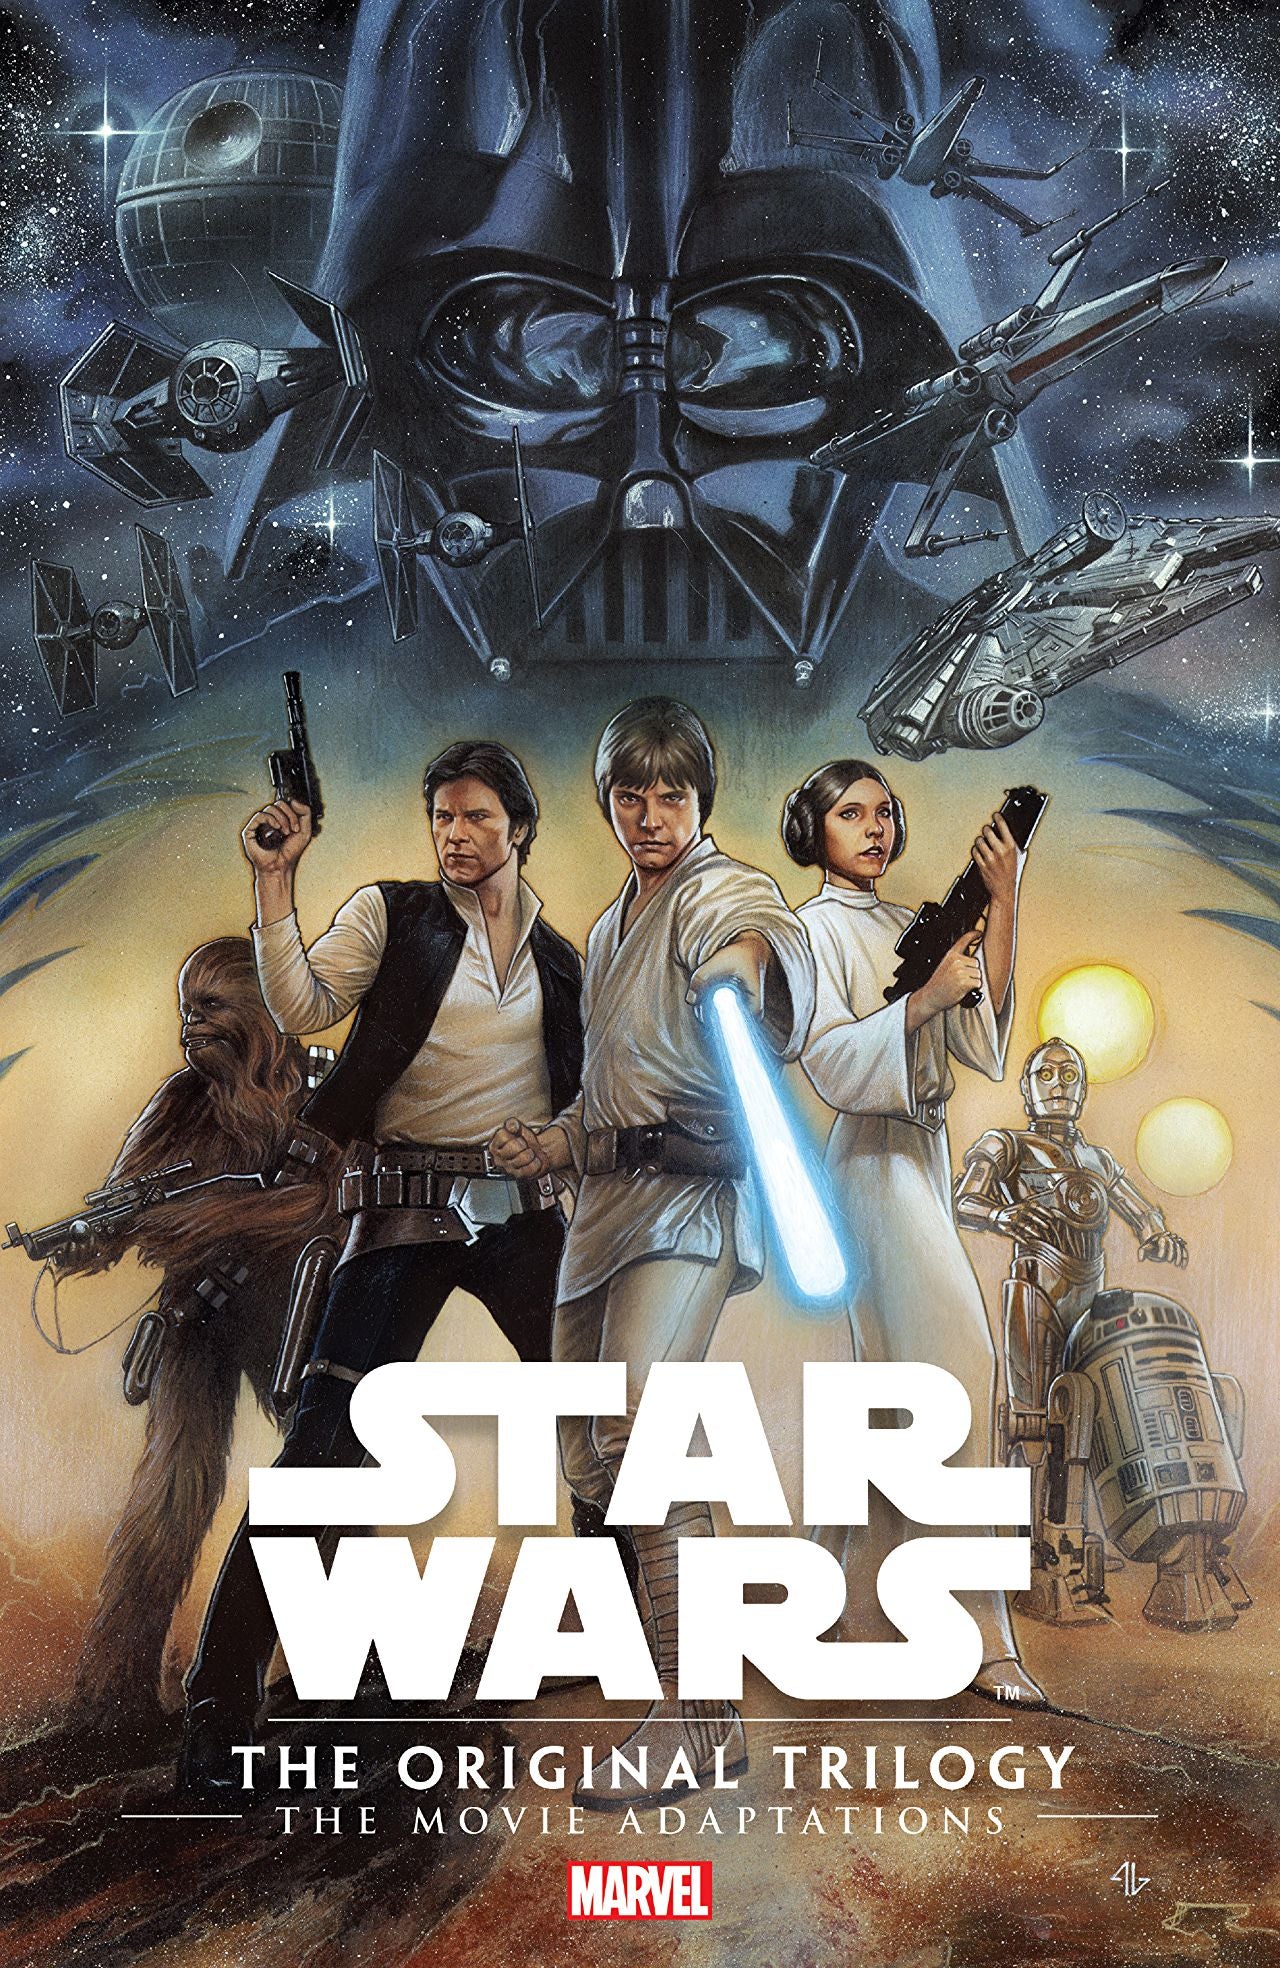 Star Wars: The Original Trilogy - The Movie Adaptations